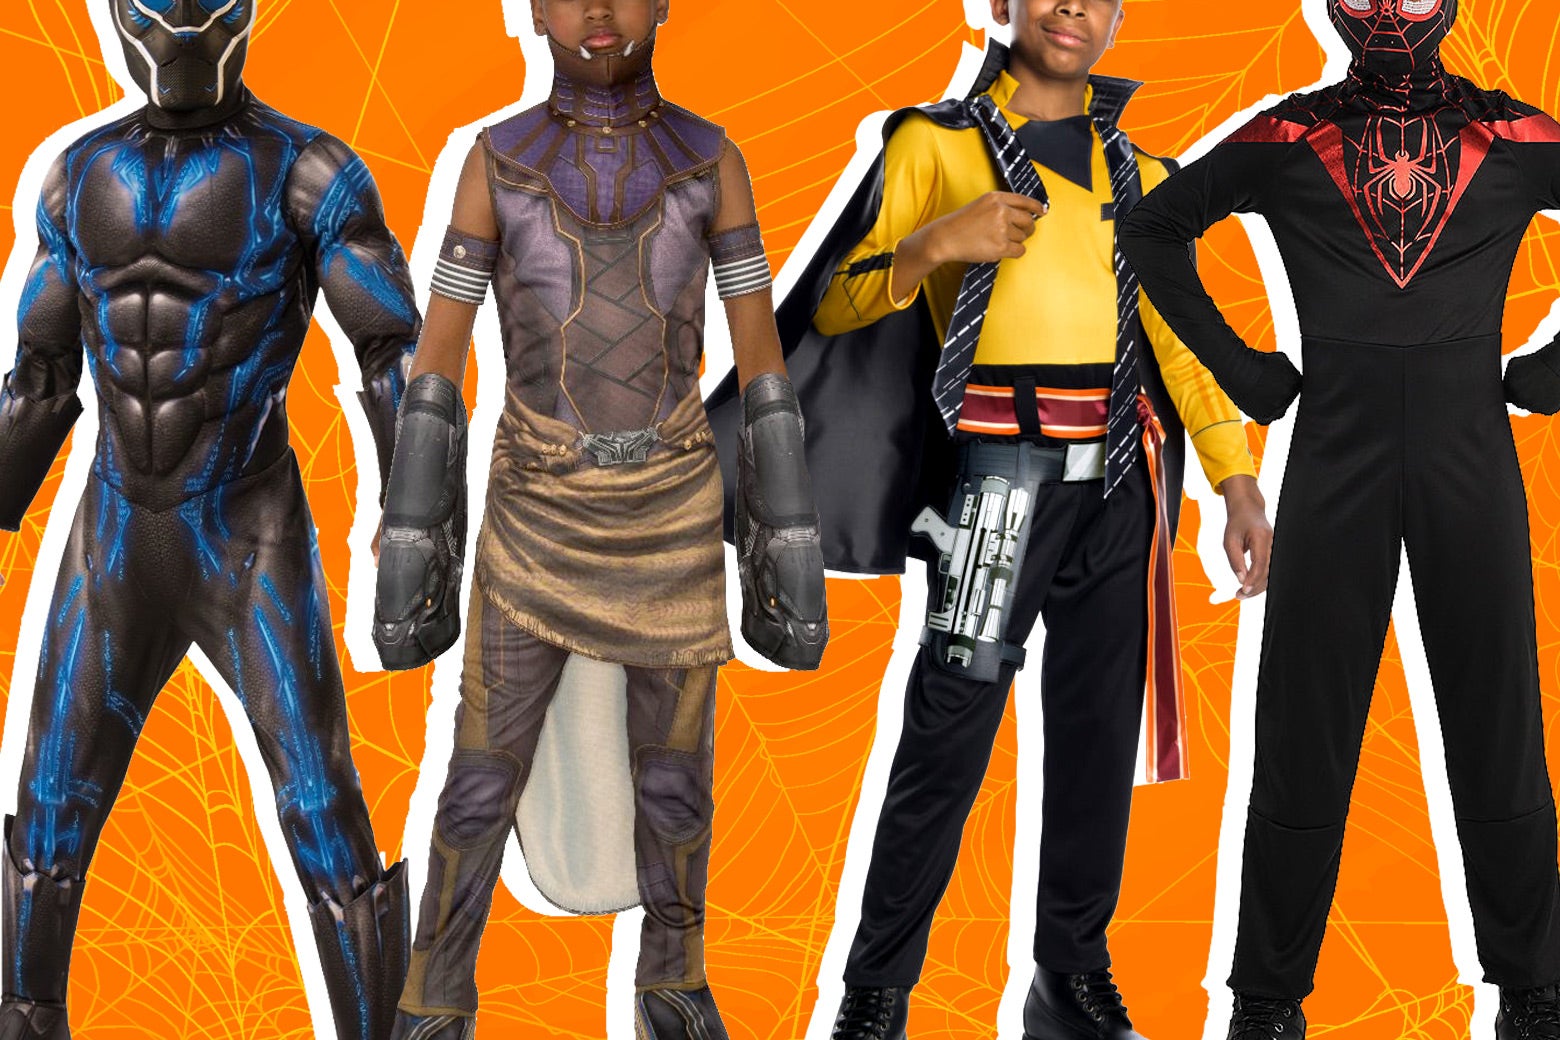 Black Panther, Shuri, Lando Calrissian, and Miles Morales children's costumes for Halloween.